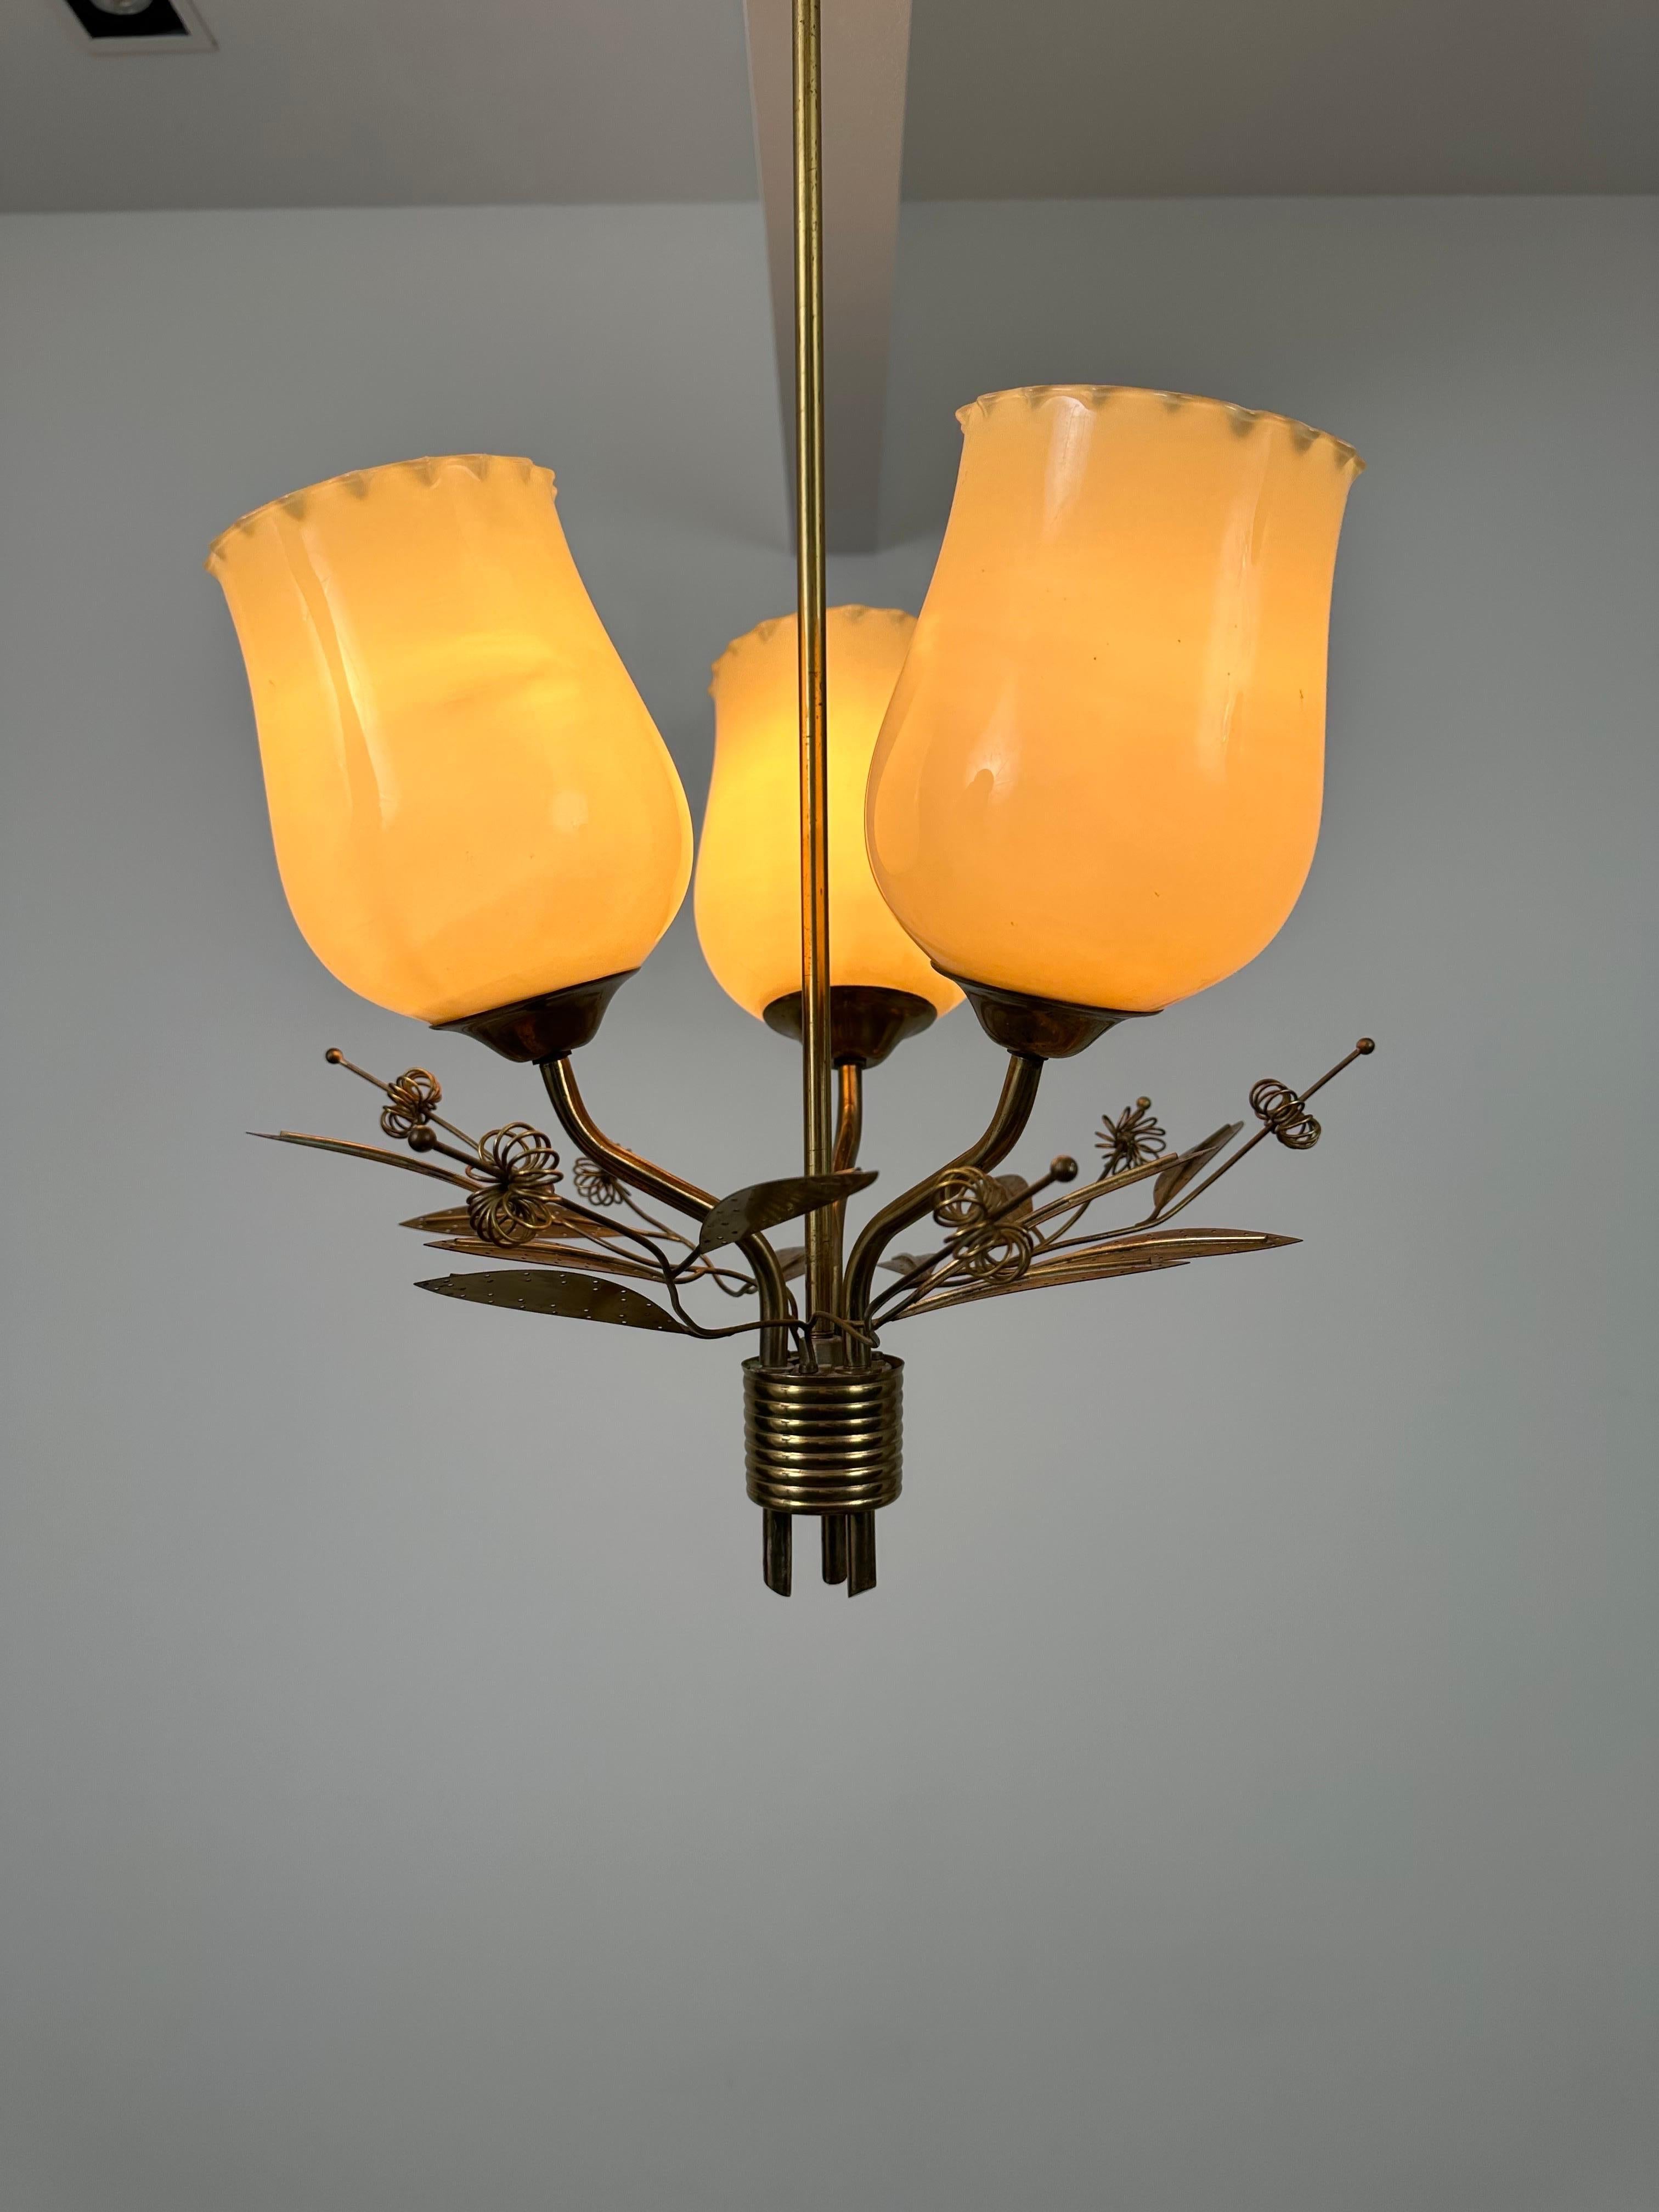 This beautiful ceiling pendant was designed during the 1950s in Finland.  Itsu, short for Itä-Suomen Sähkö (eng. Eastern Finland Electricity), was a small, lesser known manufactory that produced characteristic models in small quantities inspired